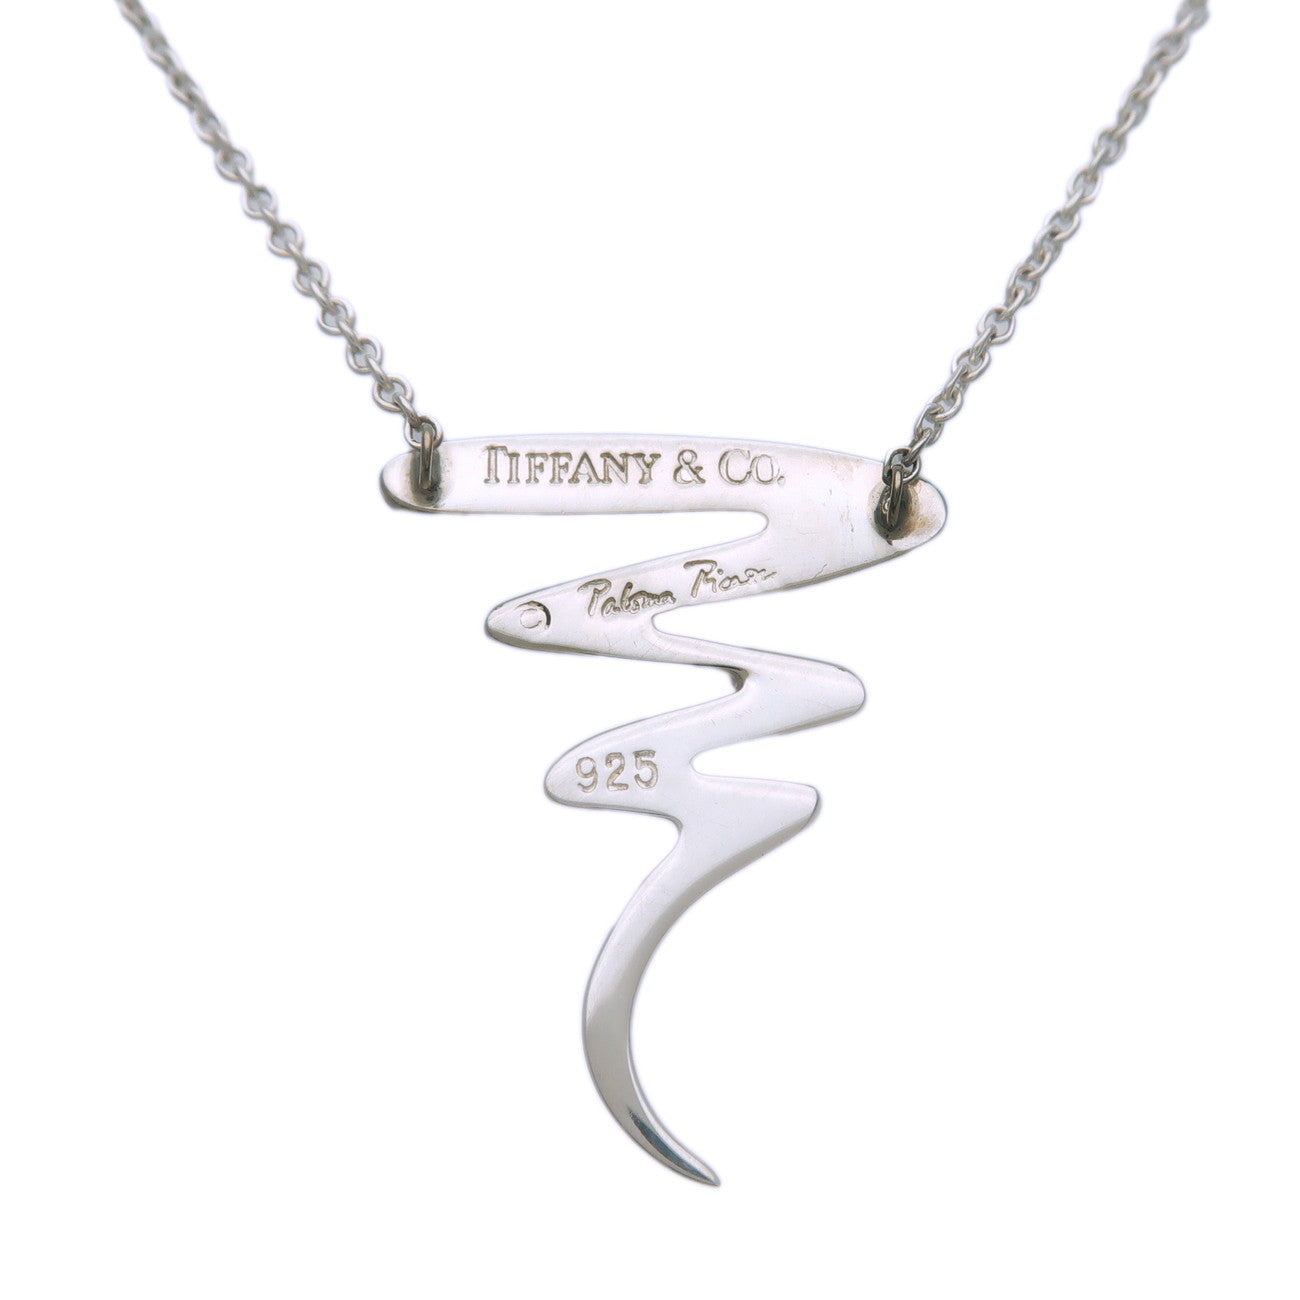 Tiffany&Co. Paloma Picasso Scribble Necklace SV925 Silver